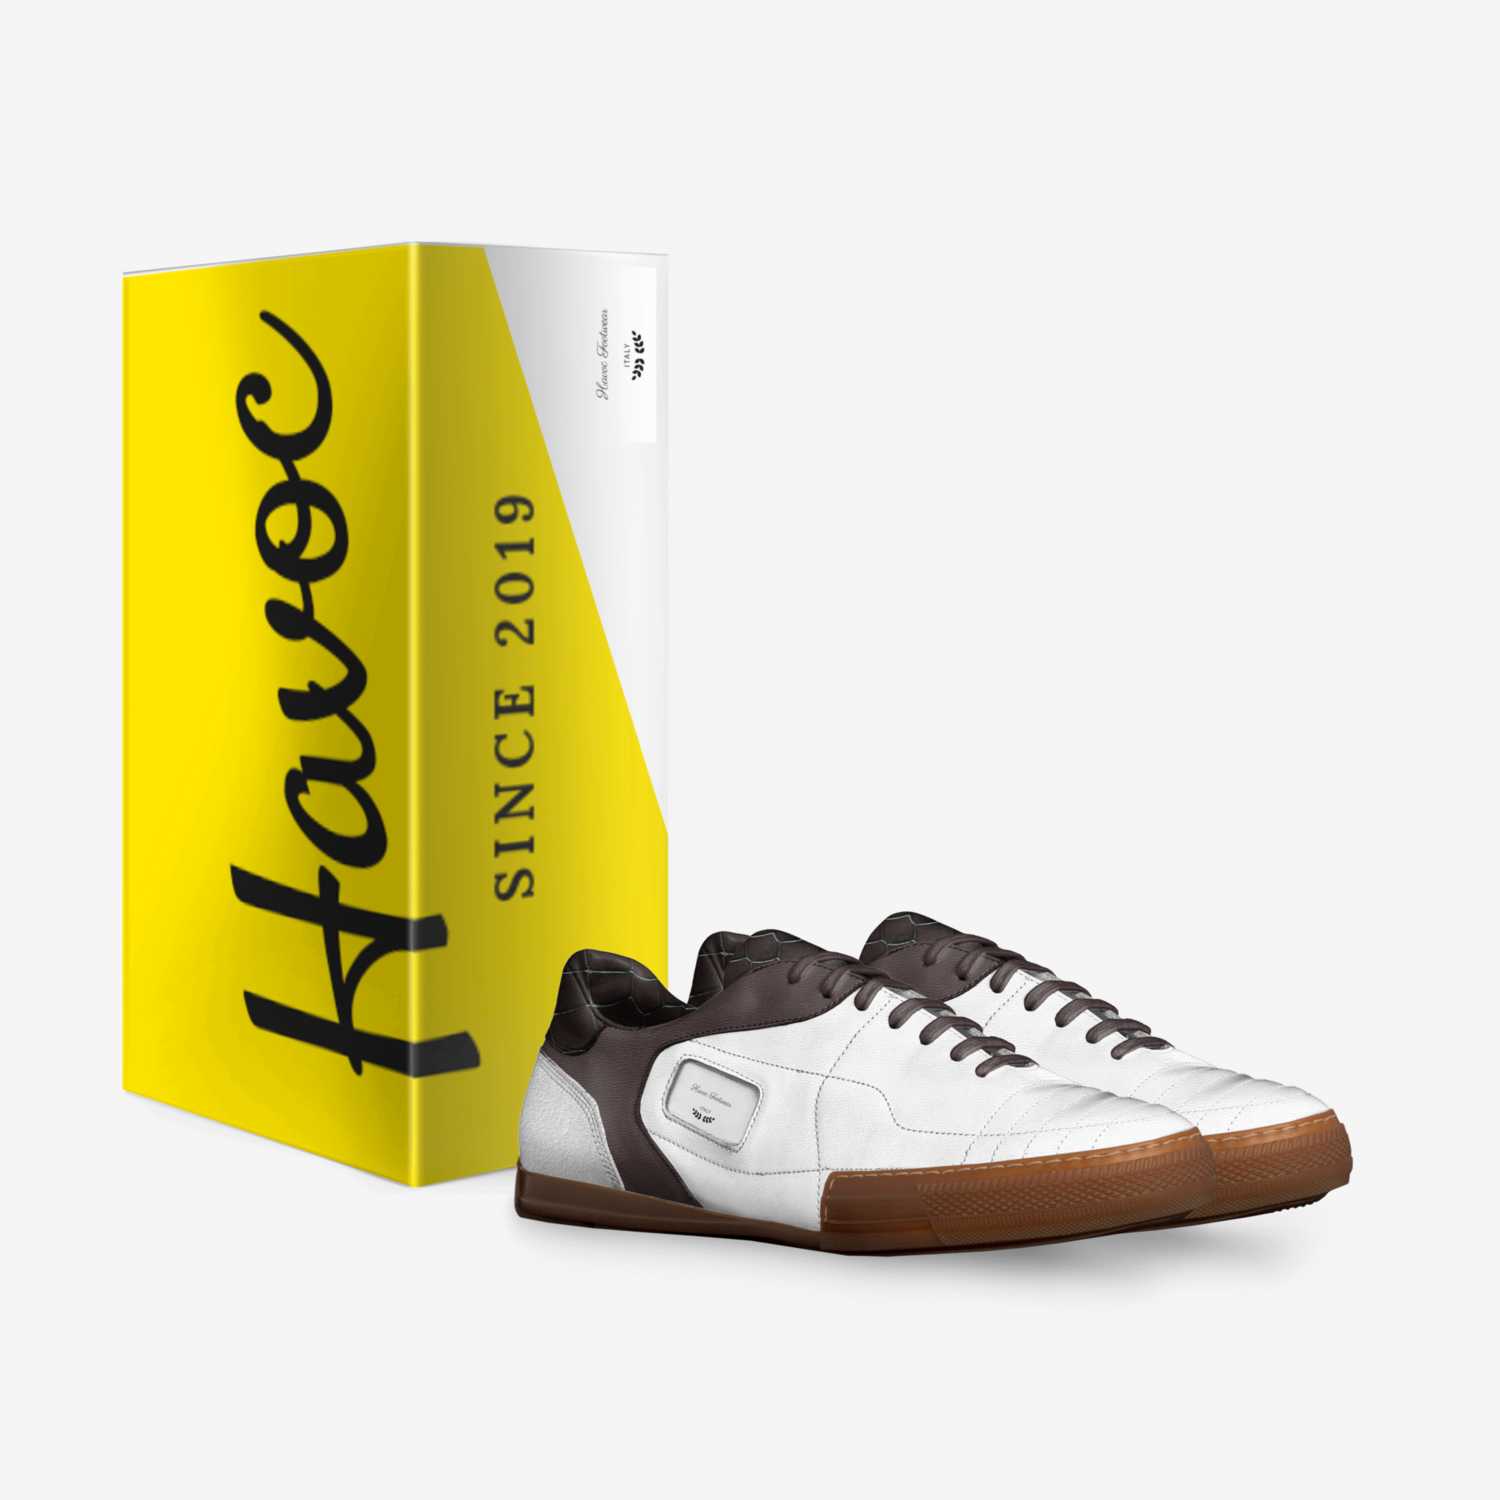 Havoc Cut1 custom made in Italy shoes by Darius Hartwell | Box view